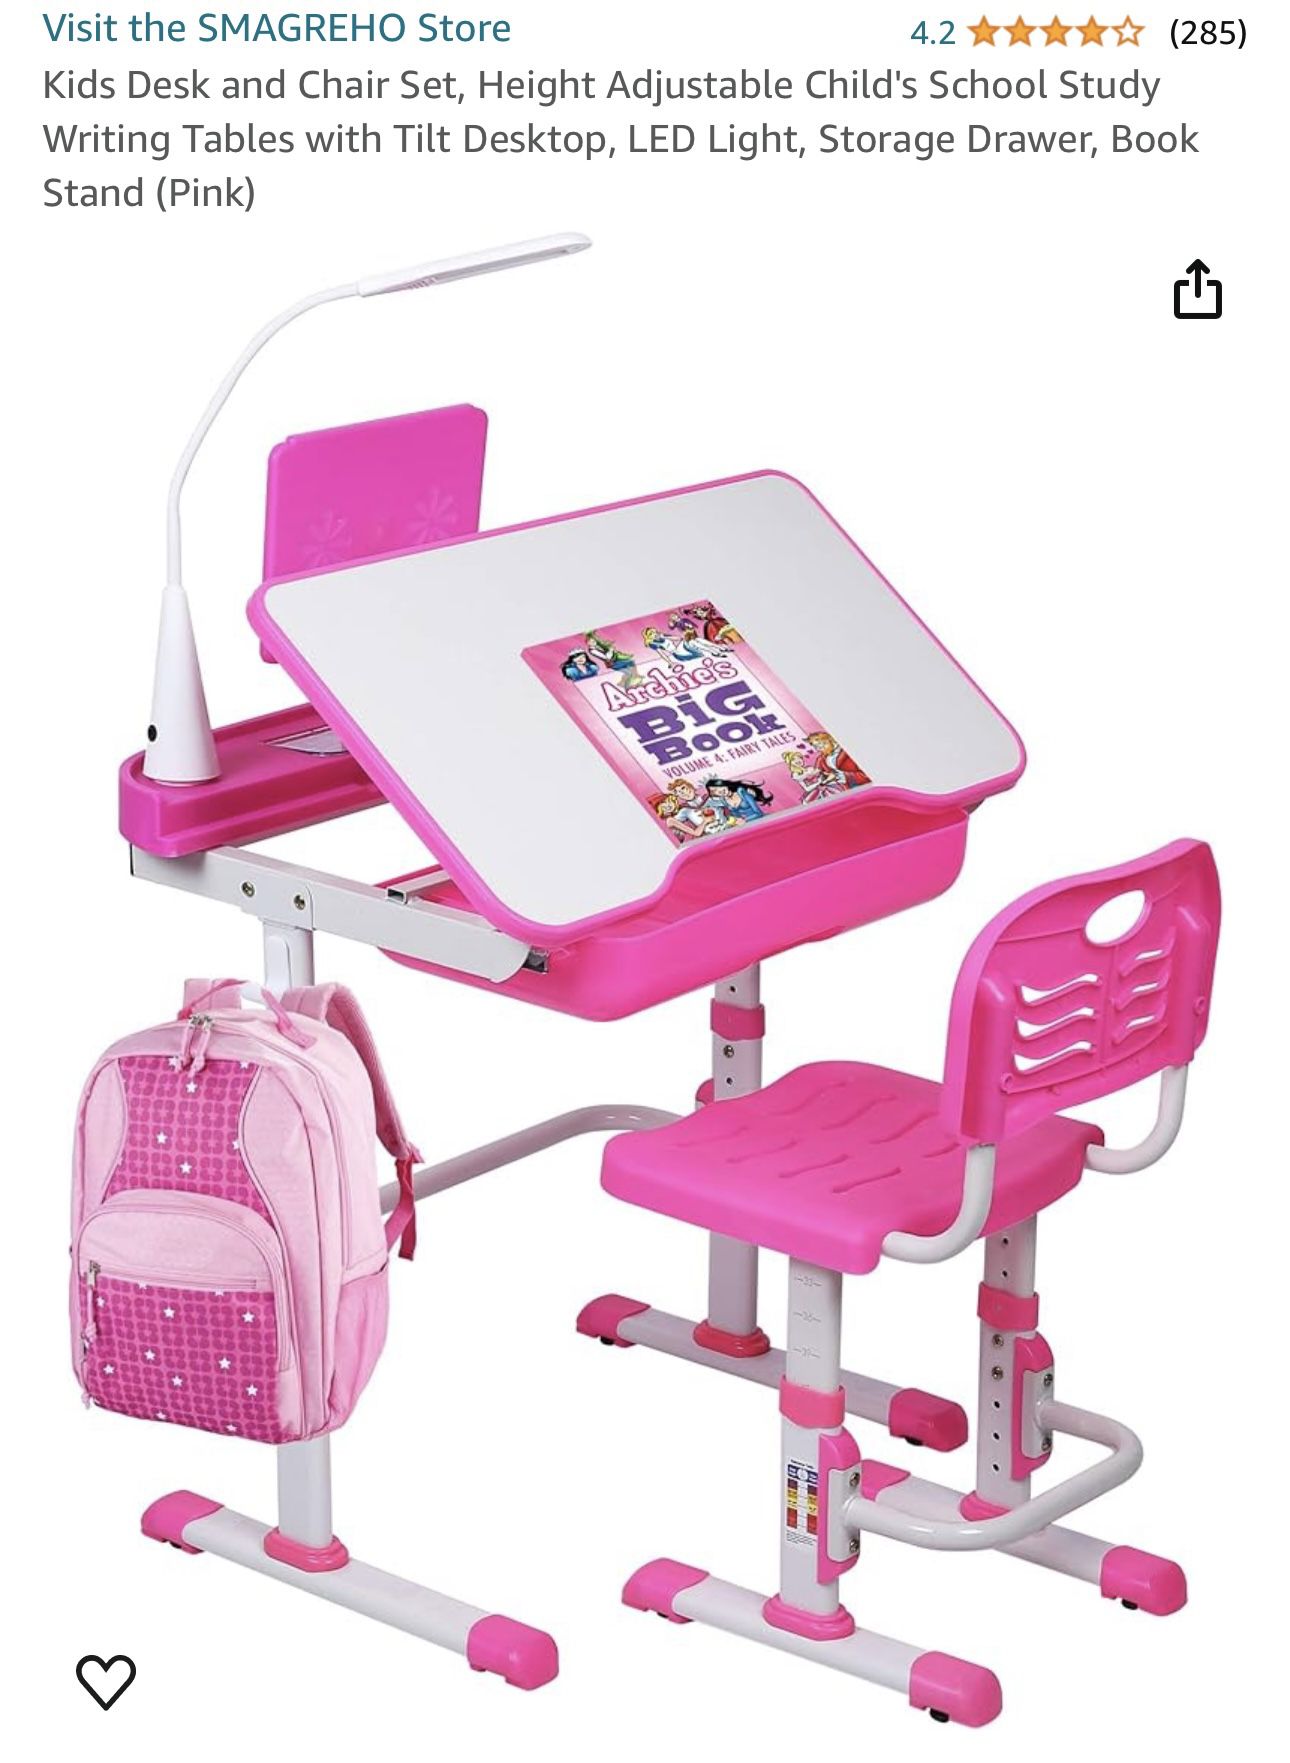 Kids Desk and Chair Set, Height Adjustable Child's School Study Writing Tables with Tilt Desktop, LED Light, Storage Drawer, Book Stand (Pink)